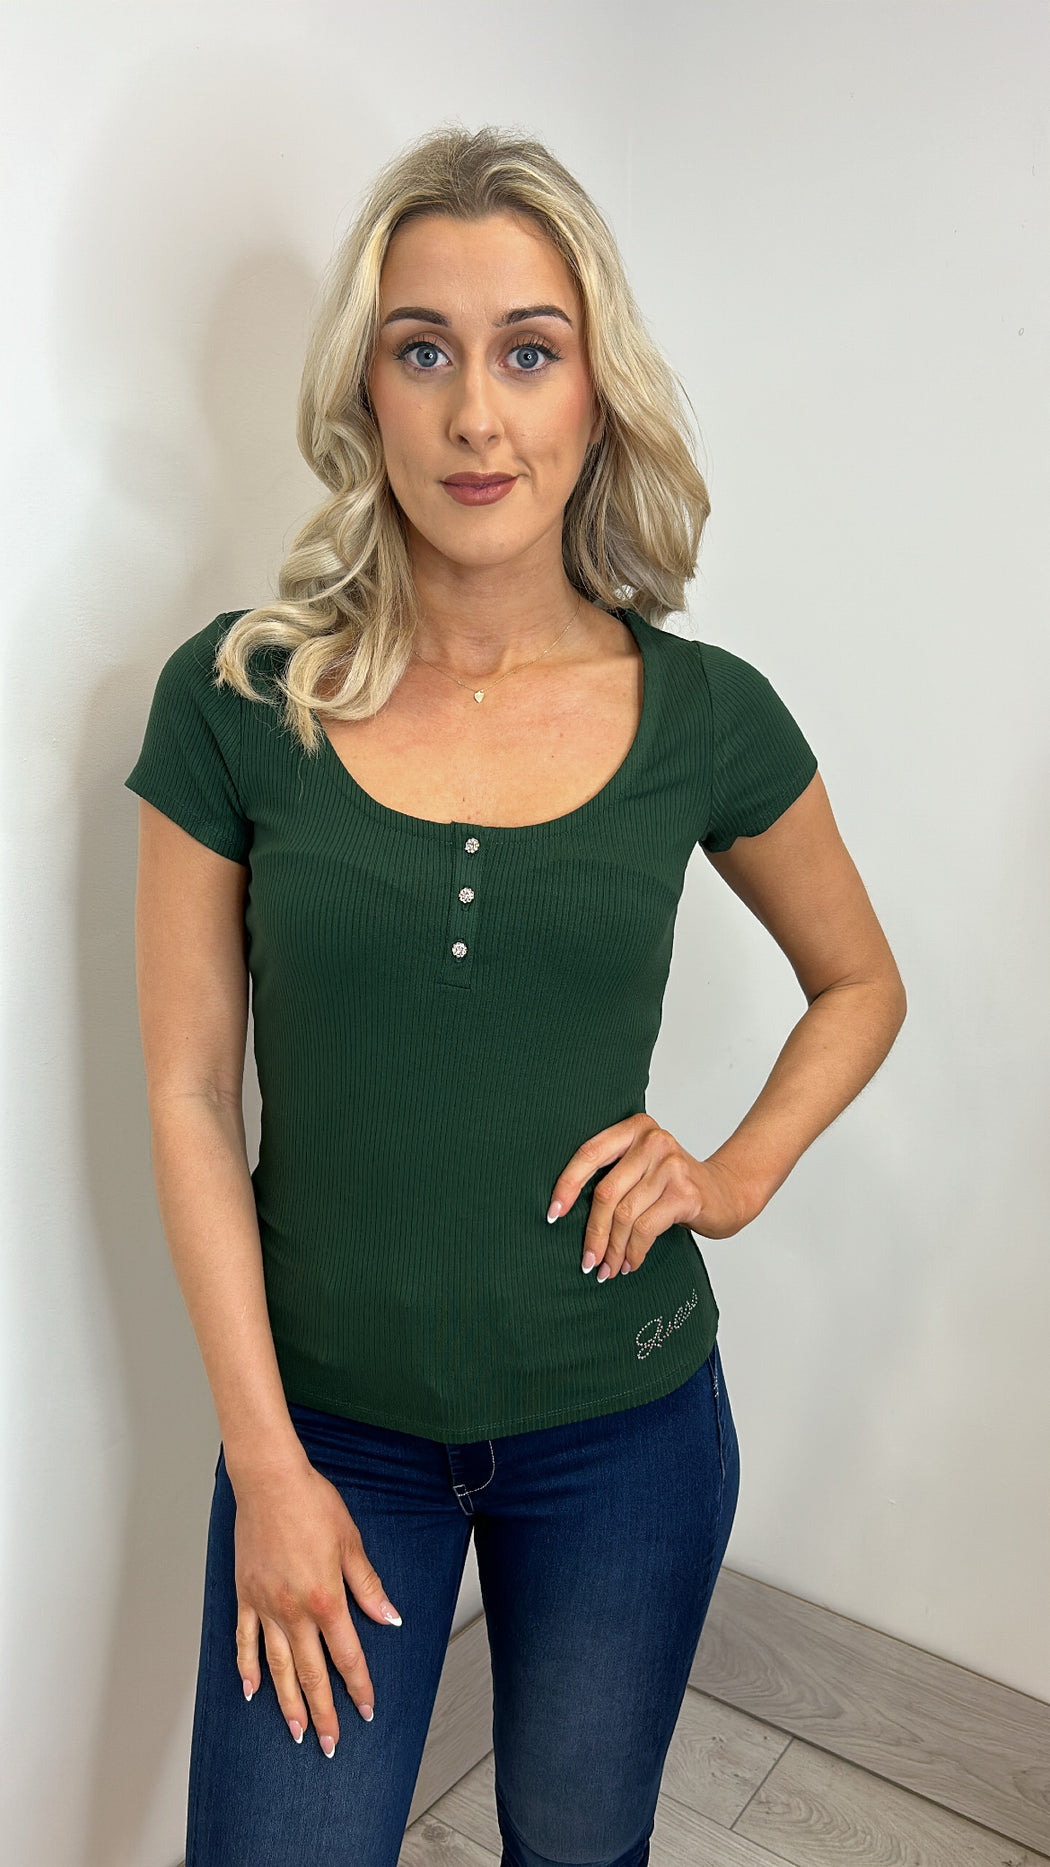 Forest green Guess jewel button top